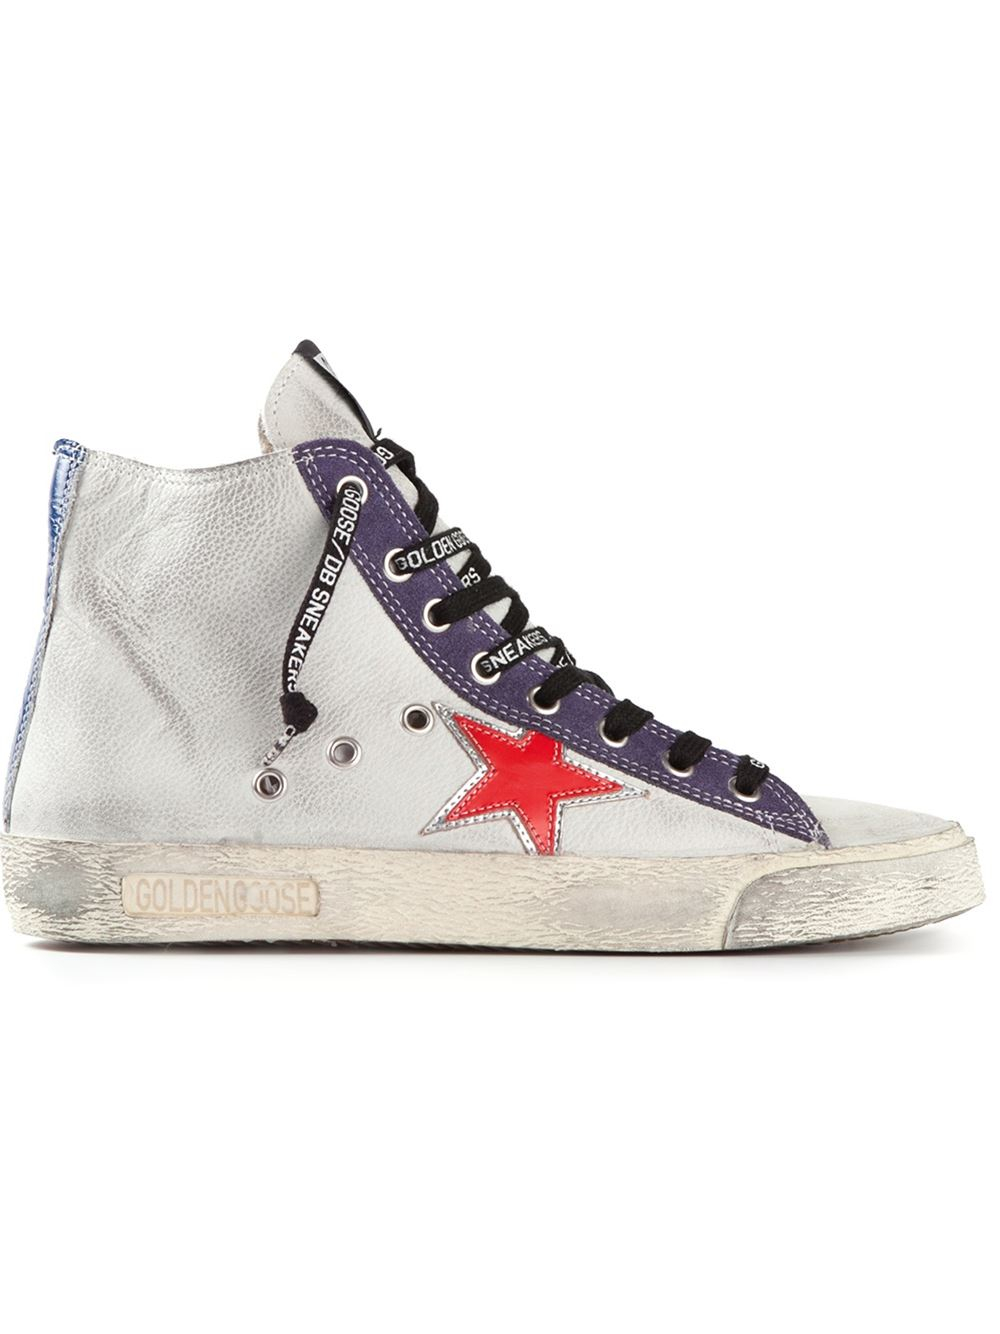 Golden goose deluxe brand High Top Lace Up Sneakers in White | Lyst